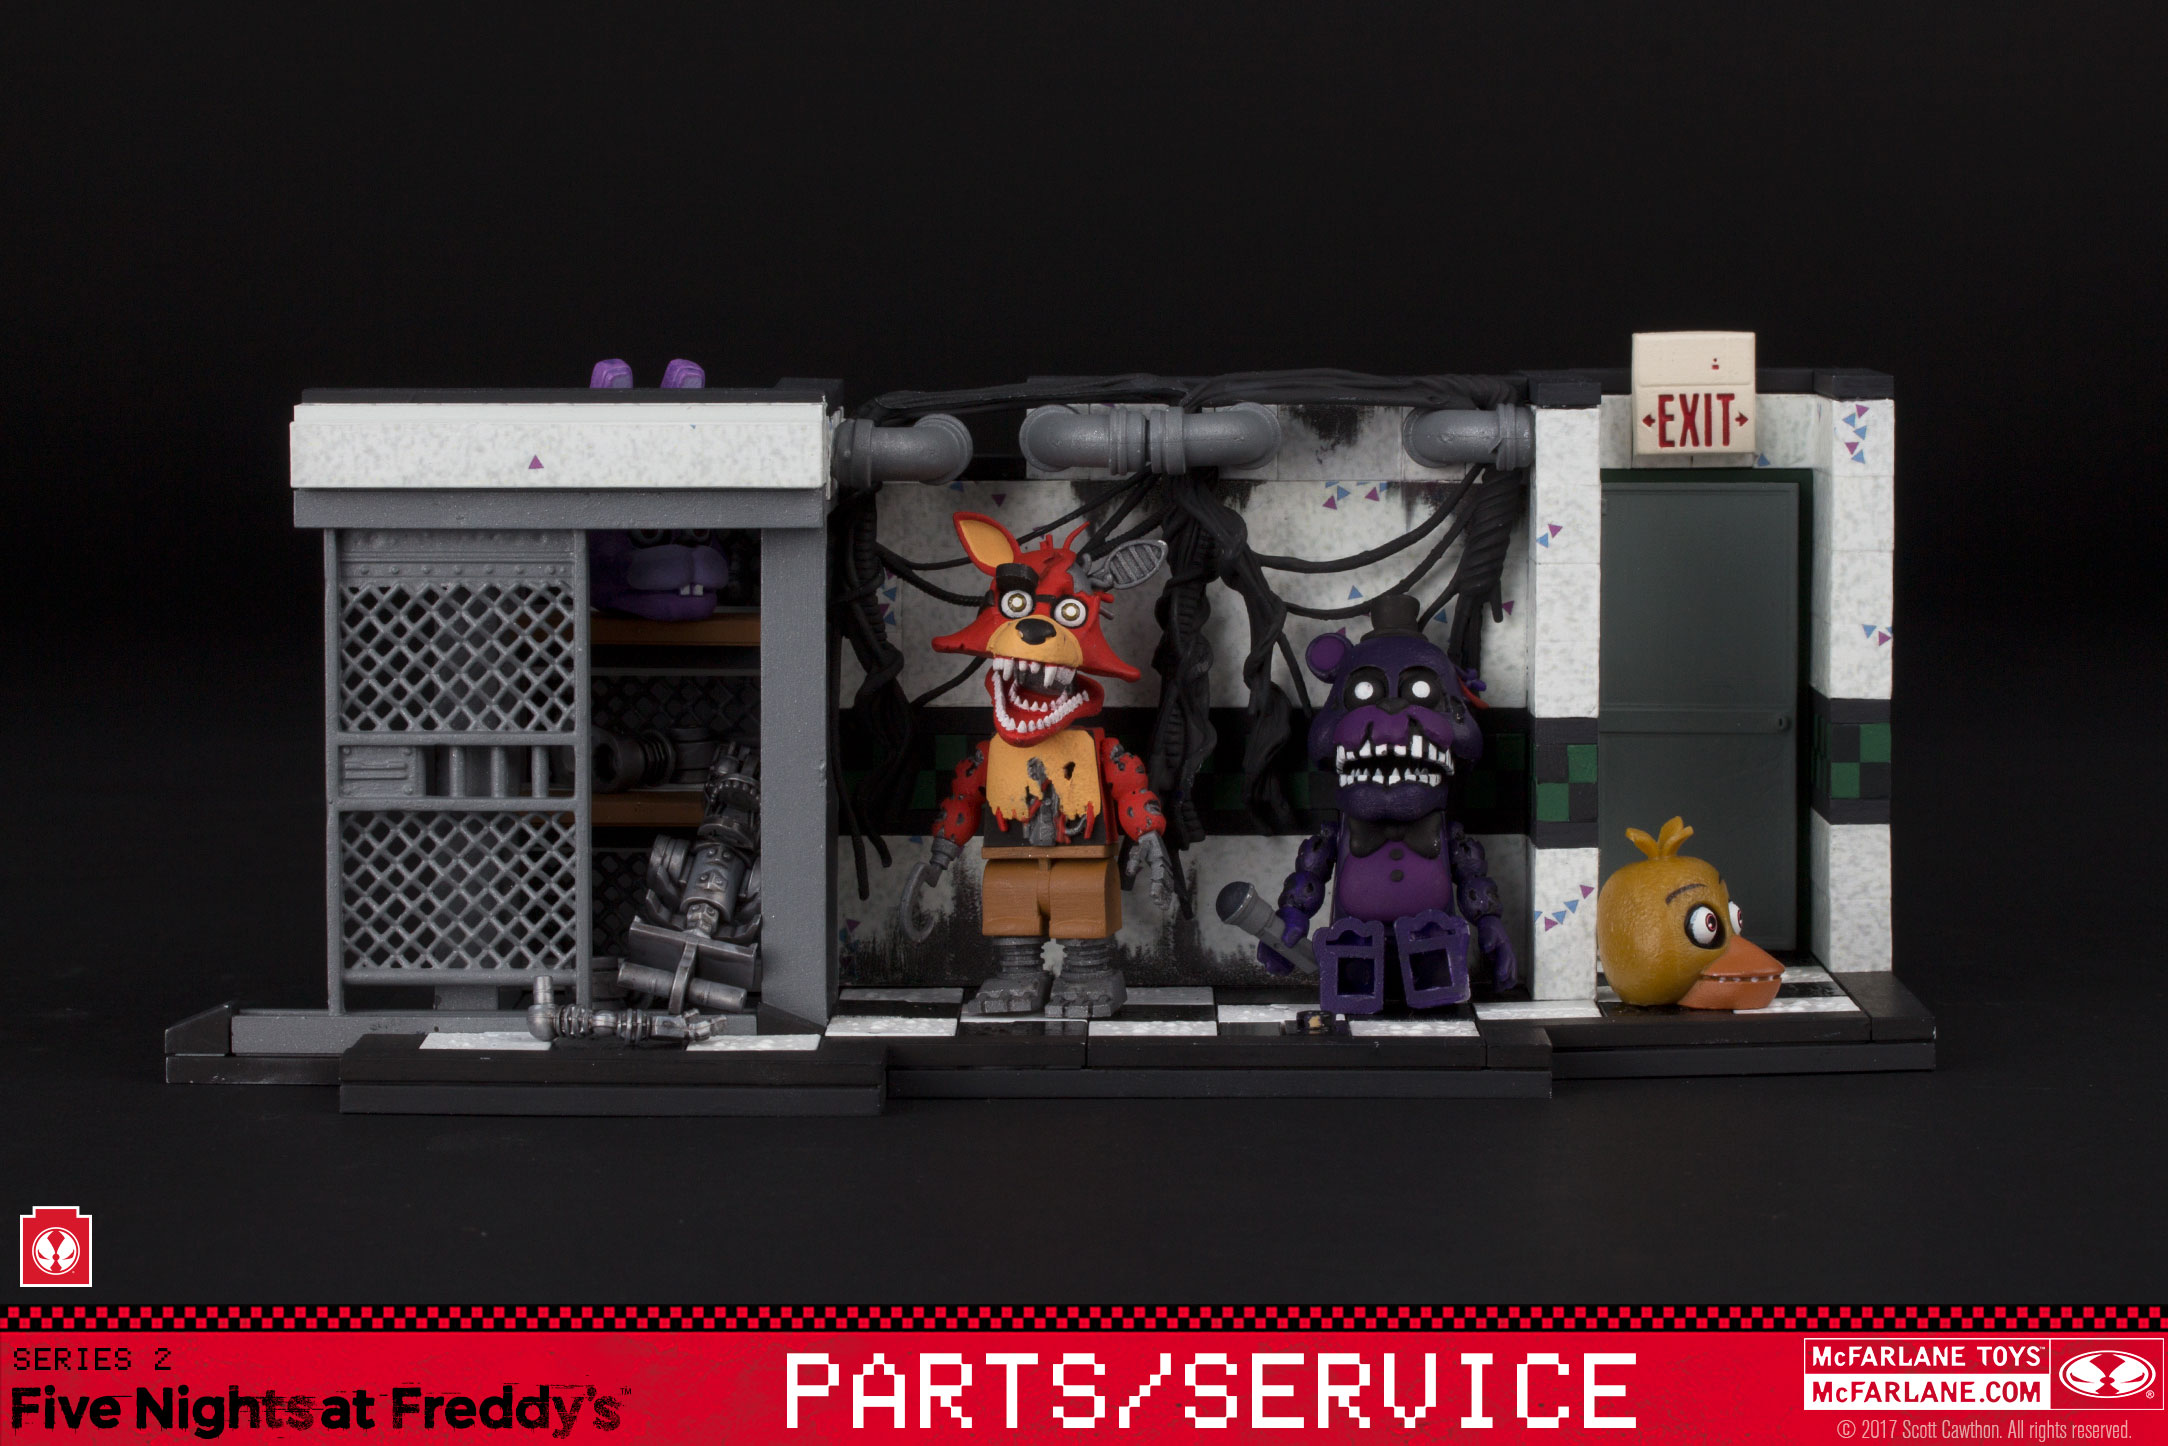 FIVE NIGHTS AT FREDDY'S FREDDY FAZBEAR WITH PARTS AND SERVICE